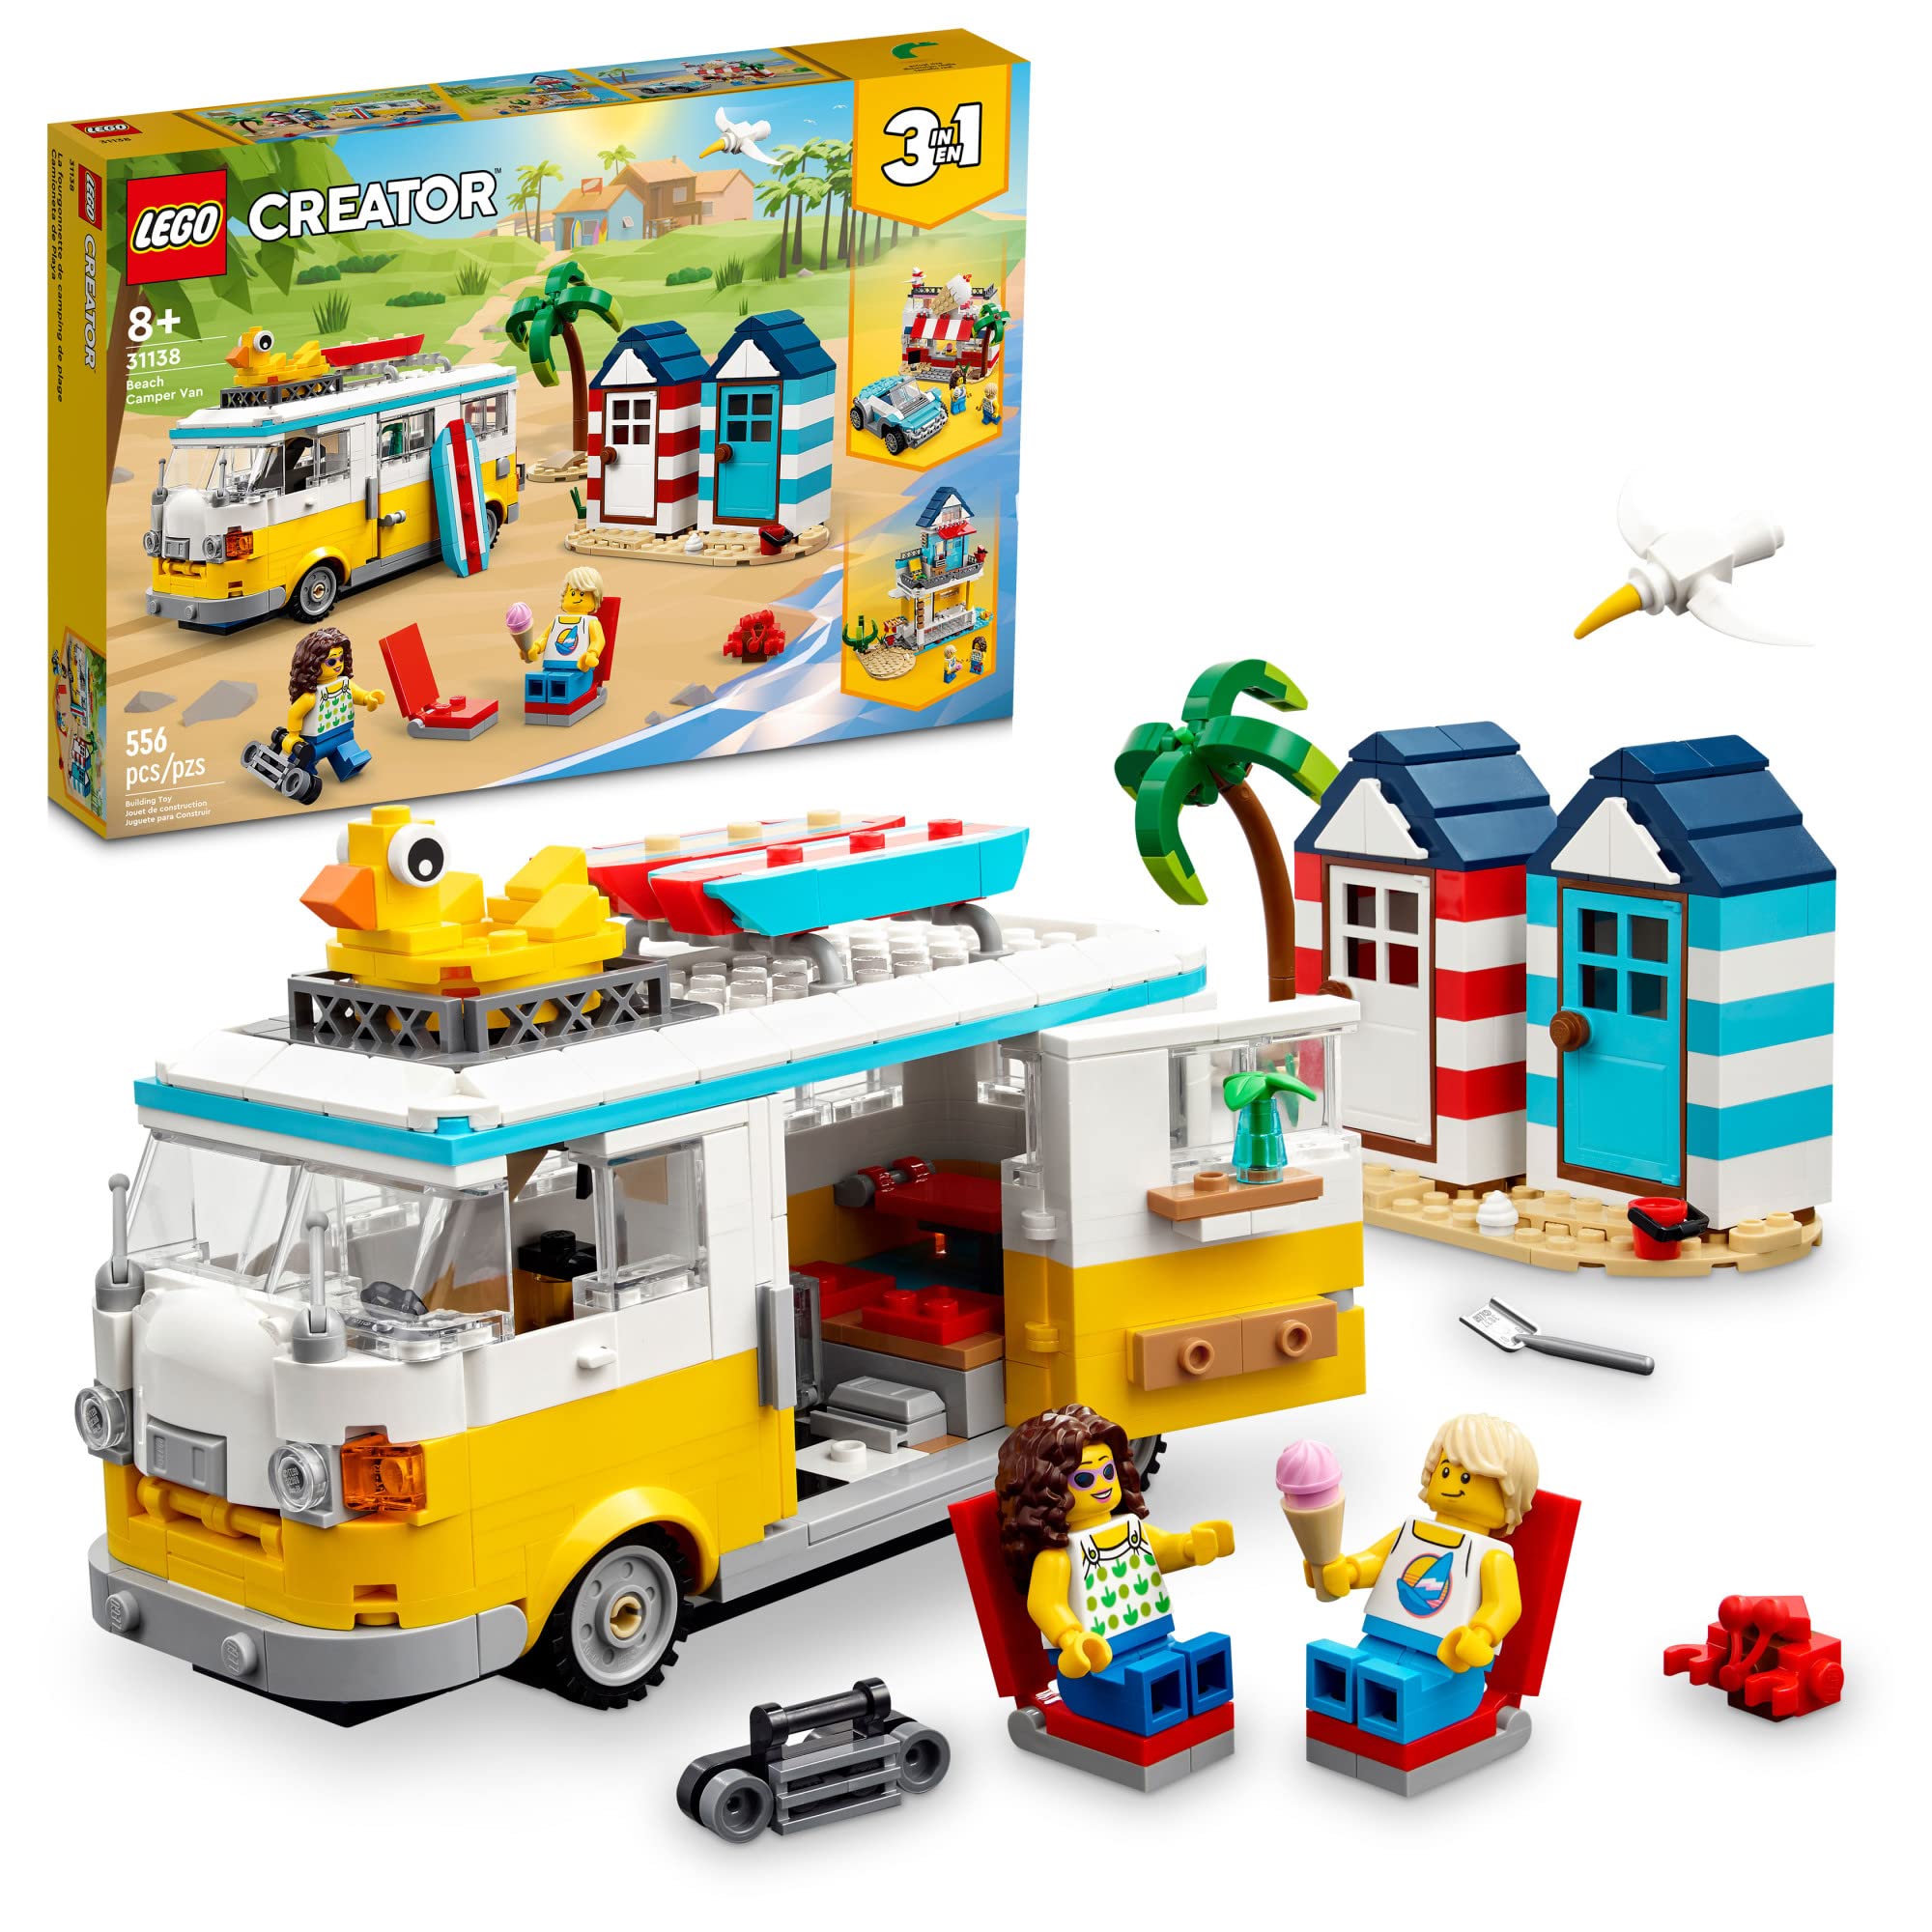 LEGO Creator 3in1 Beach Camper Van 31138 Building Kit, Kids Can Build a Campervan, Ice Cream Shop, and Beach House, Great Gift for Surfer Boys Girls, Pretend Play Beach Life